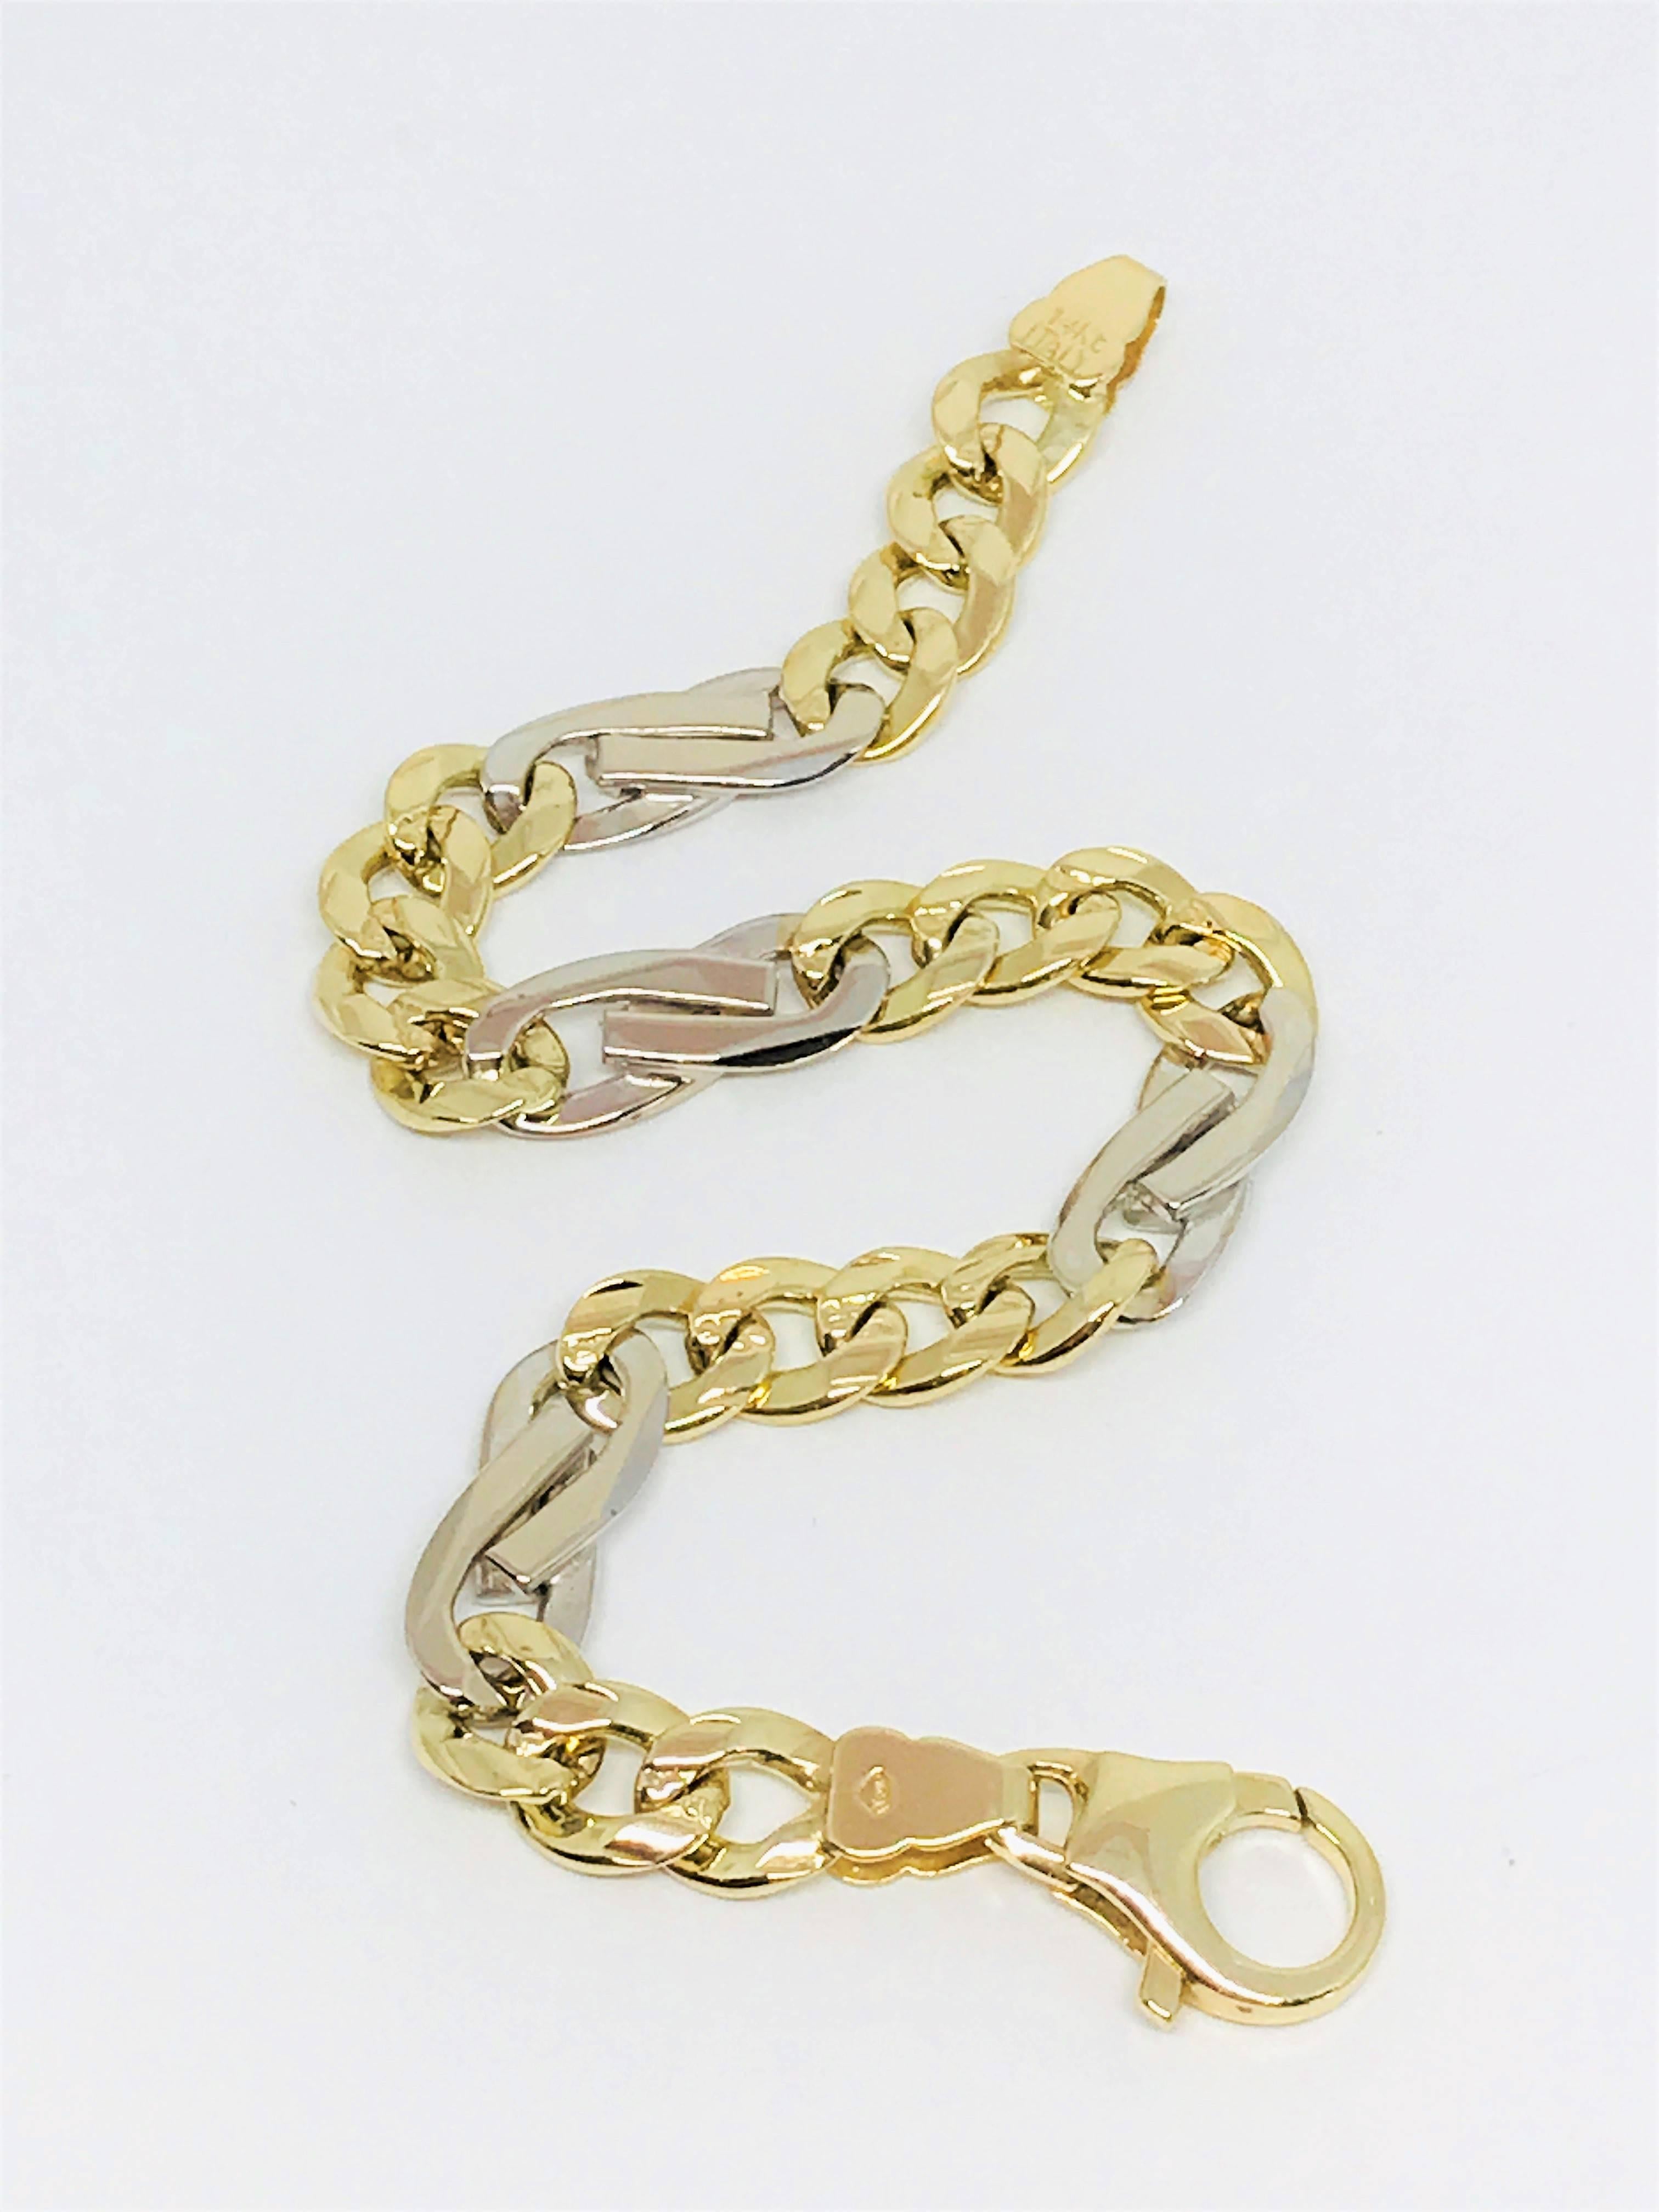 Stunning 14k Two Tone Gold Gent's Curb Link Bracelet. The two tone gold really stands out on this link bracelet!
Length - 8.25 inches
Weight - 27.67 grams
Hallmarked - 14KT ITALY AGSJ